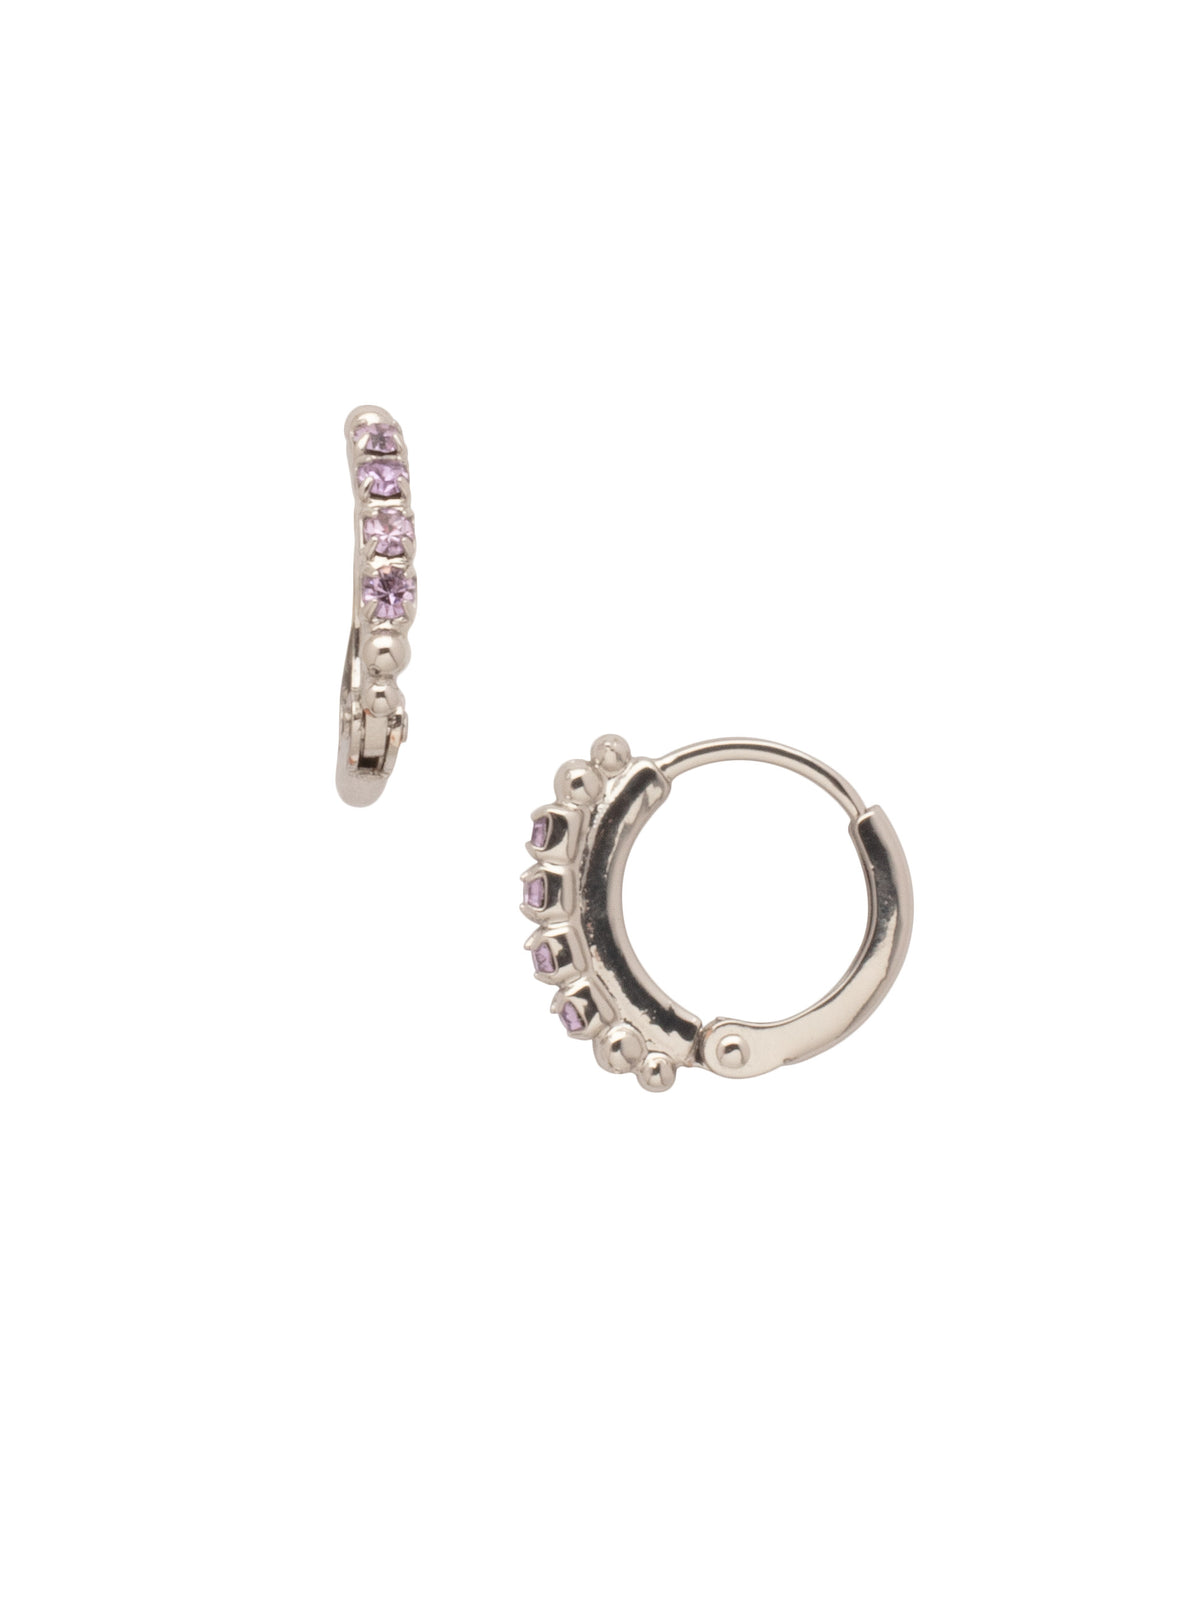 Crystal Huggie Hoop Earrings - EFP22PDLCH - <p>The Crystal Huggie Hoop Earrings feature small round cut crystals embellished on a tiny metal huggie hoop. From Sorrelli's Lilac Champagne collection in our Palladium finish.</p>